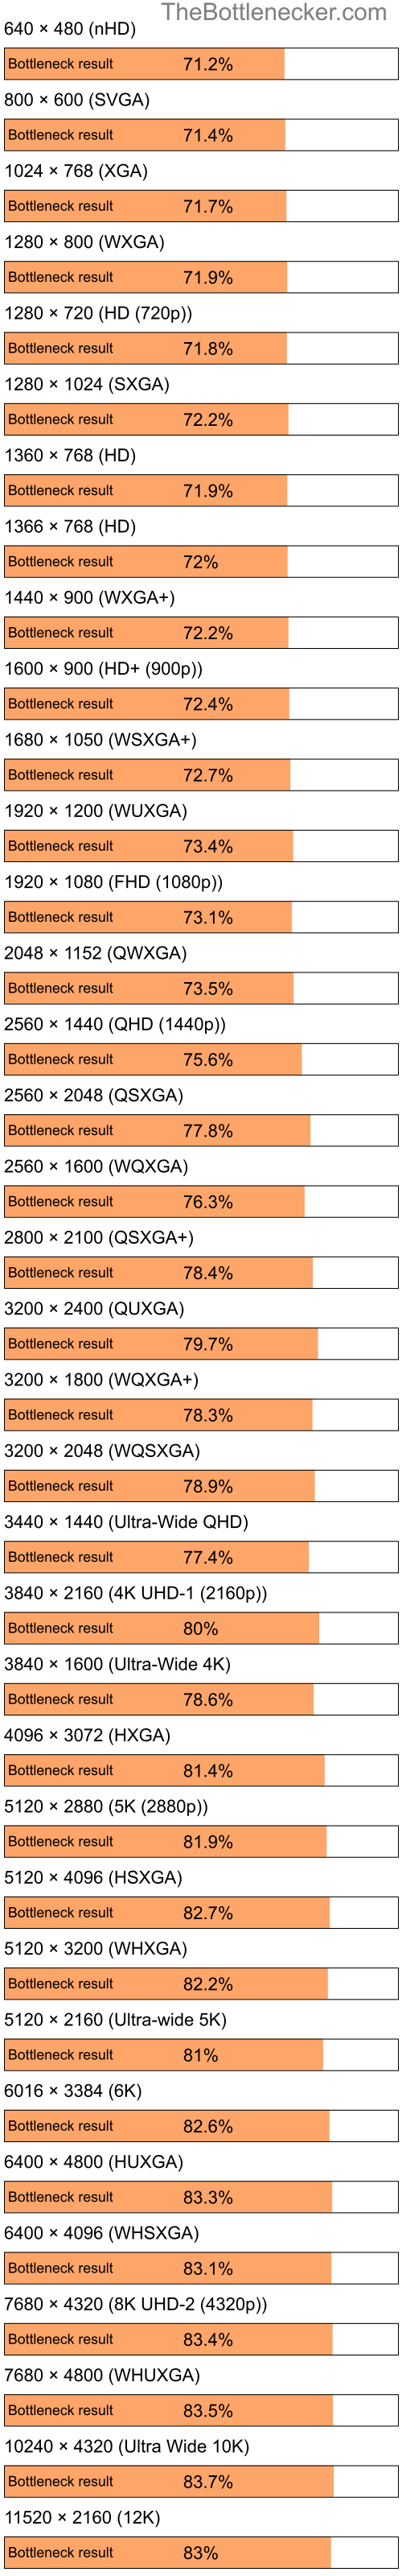 Bottleneck results by resolution for Intel Atom N280 and AMD Radeon X1550 in7 Days to Die